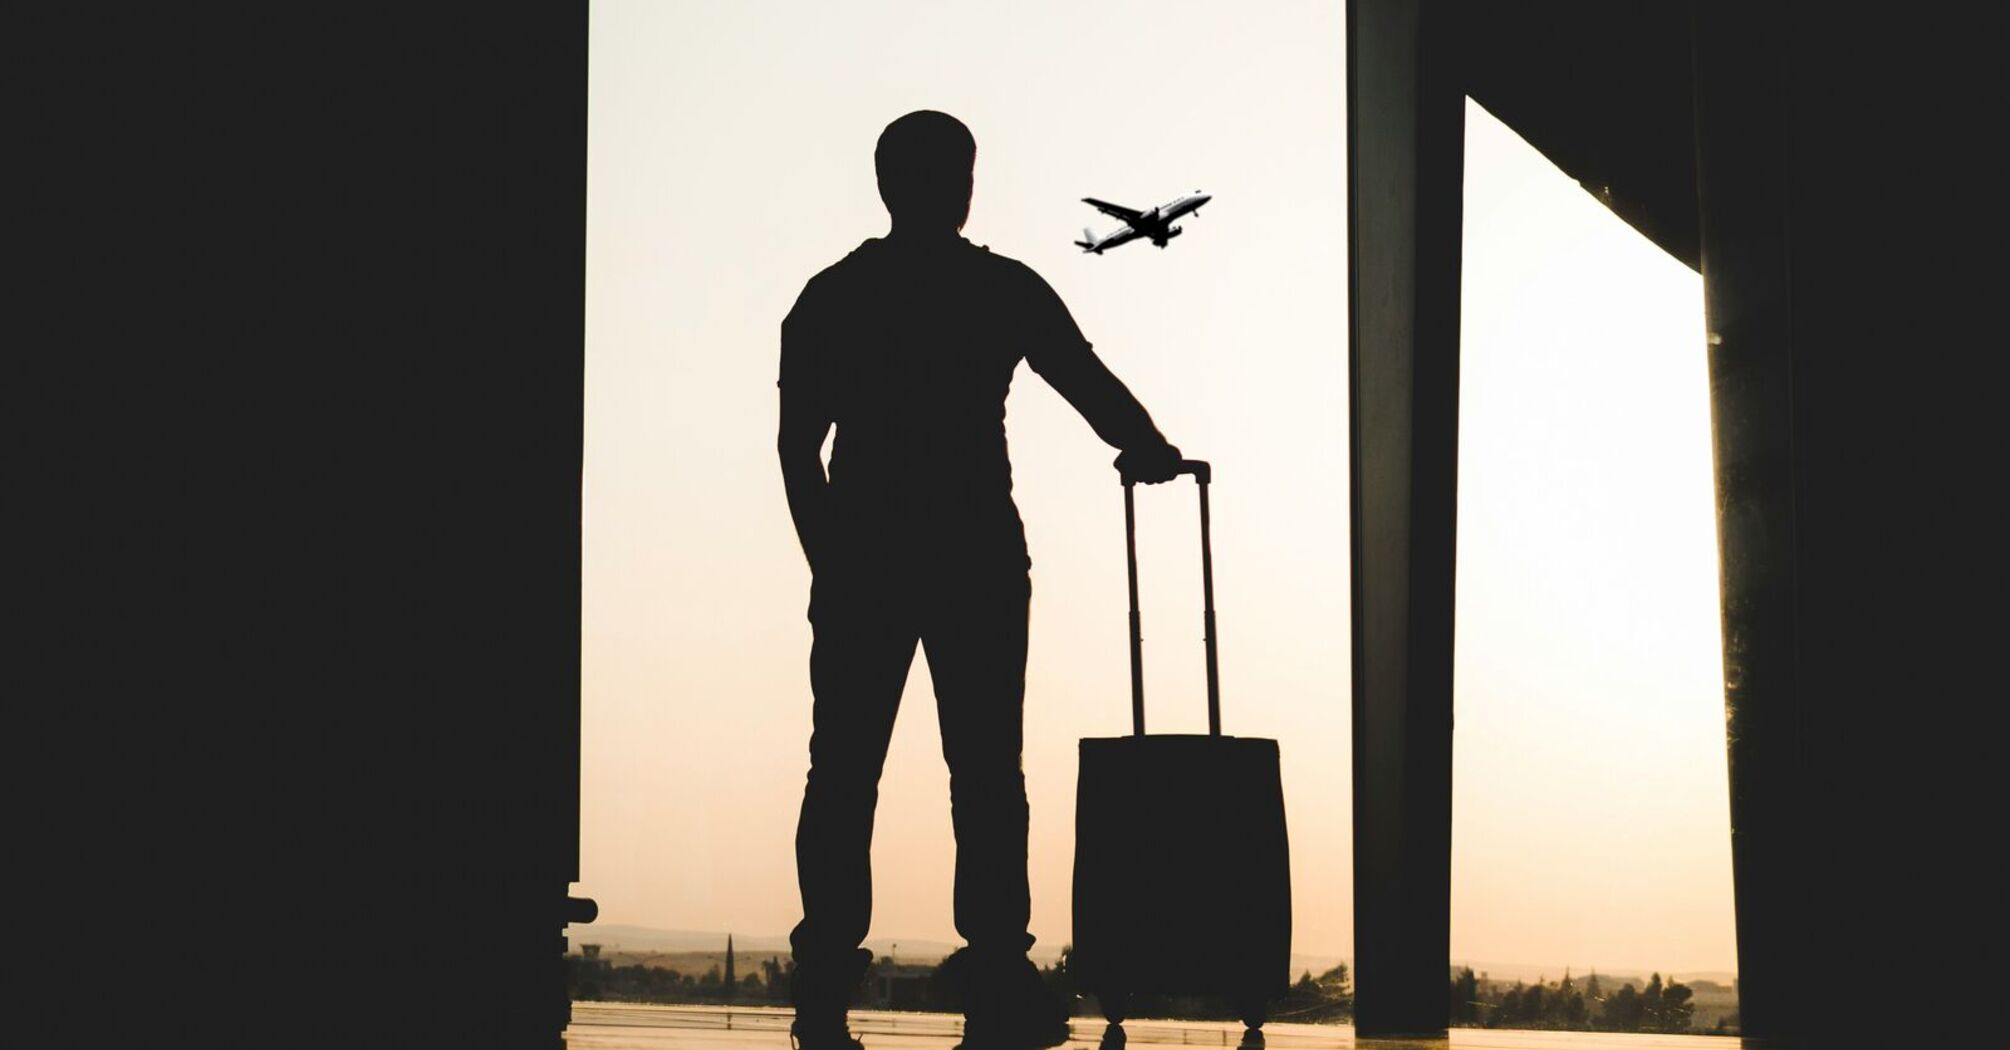 Silhouette of a traveler in an airport